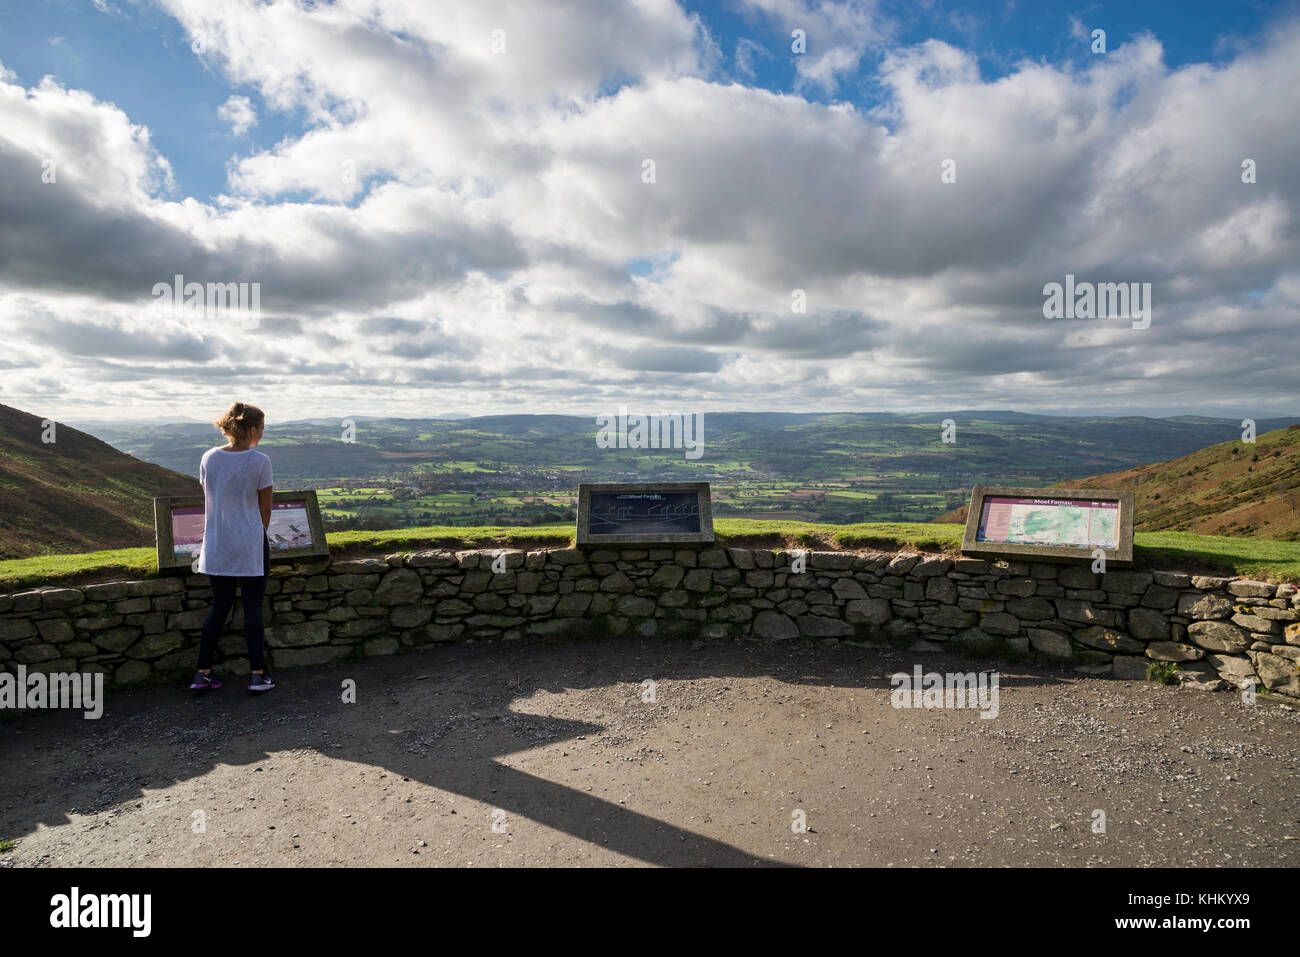 Viewpoint at Bwlch Penbarra car park in Moel Famau country park, North Wales. Beautiful view of the Vale of Clwyd. Stock Photo